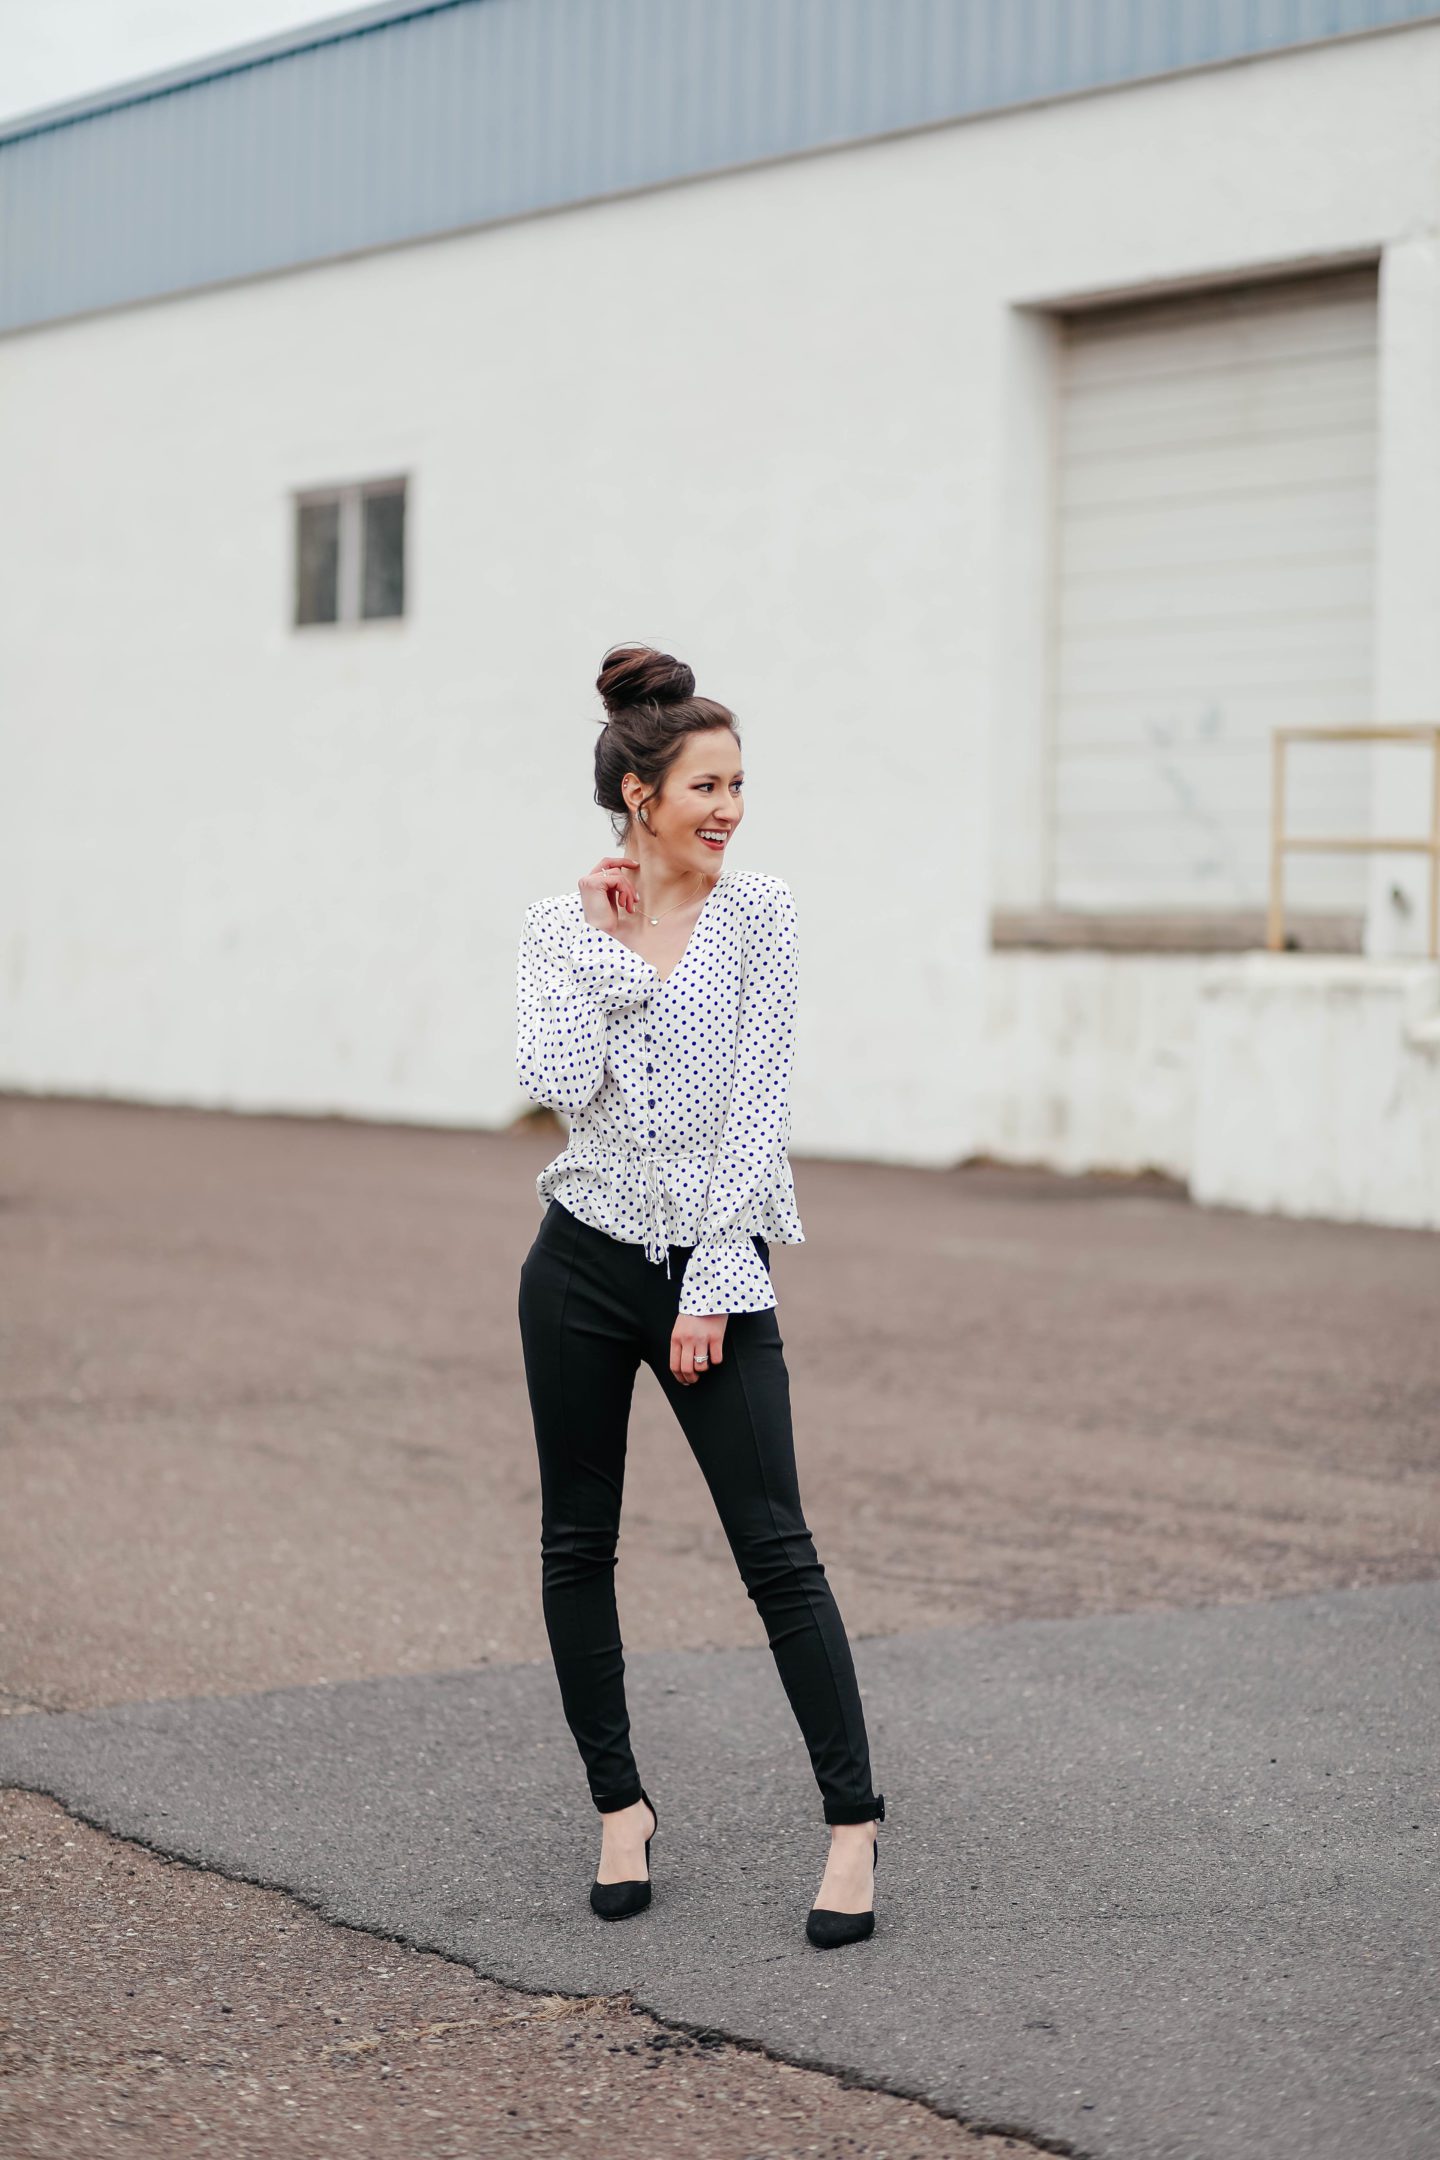 From Desk to Drinks: Polka Dot Blouse + Ponte Pants - Affordable Workwear on Coming Up Roses (UNDER $30 OUTFIT!!!)